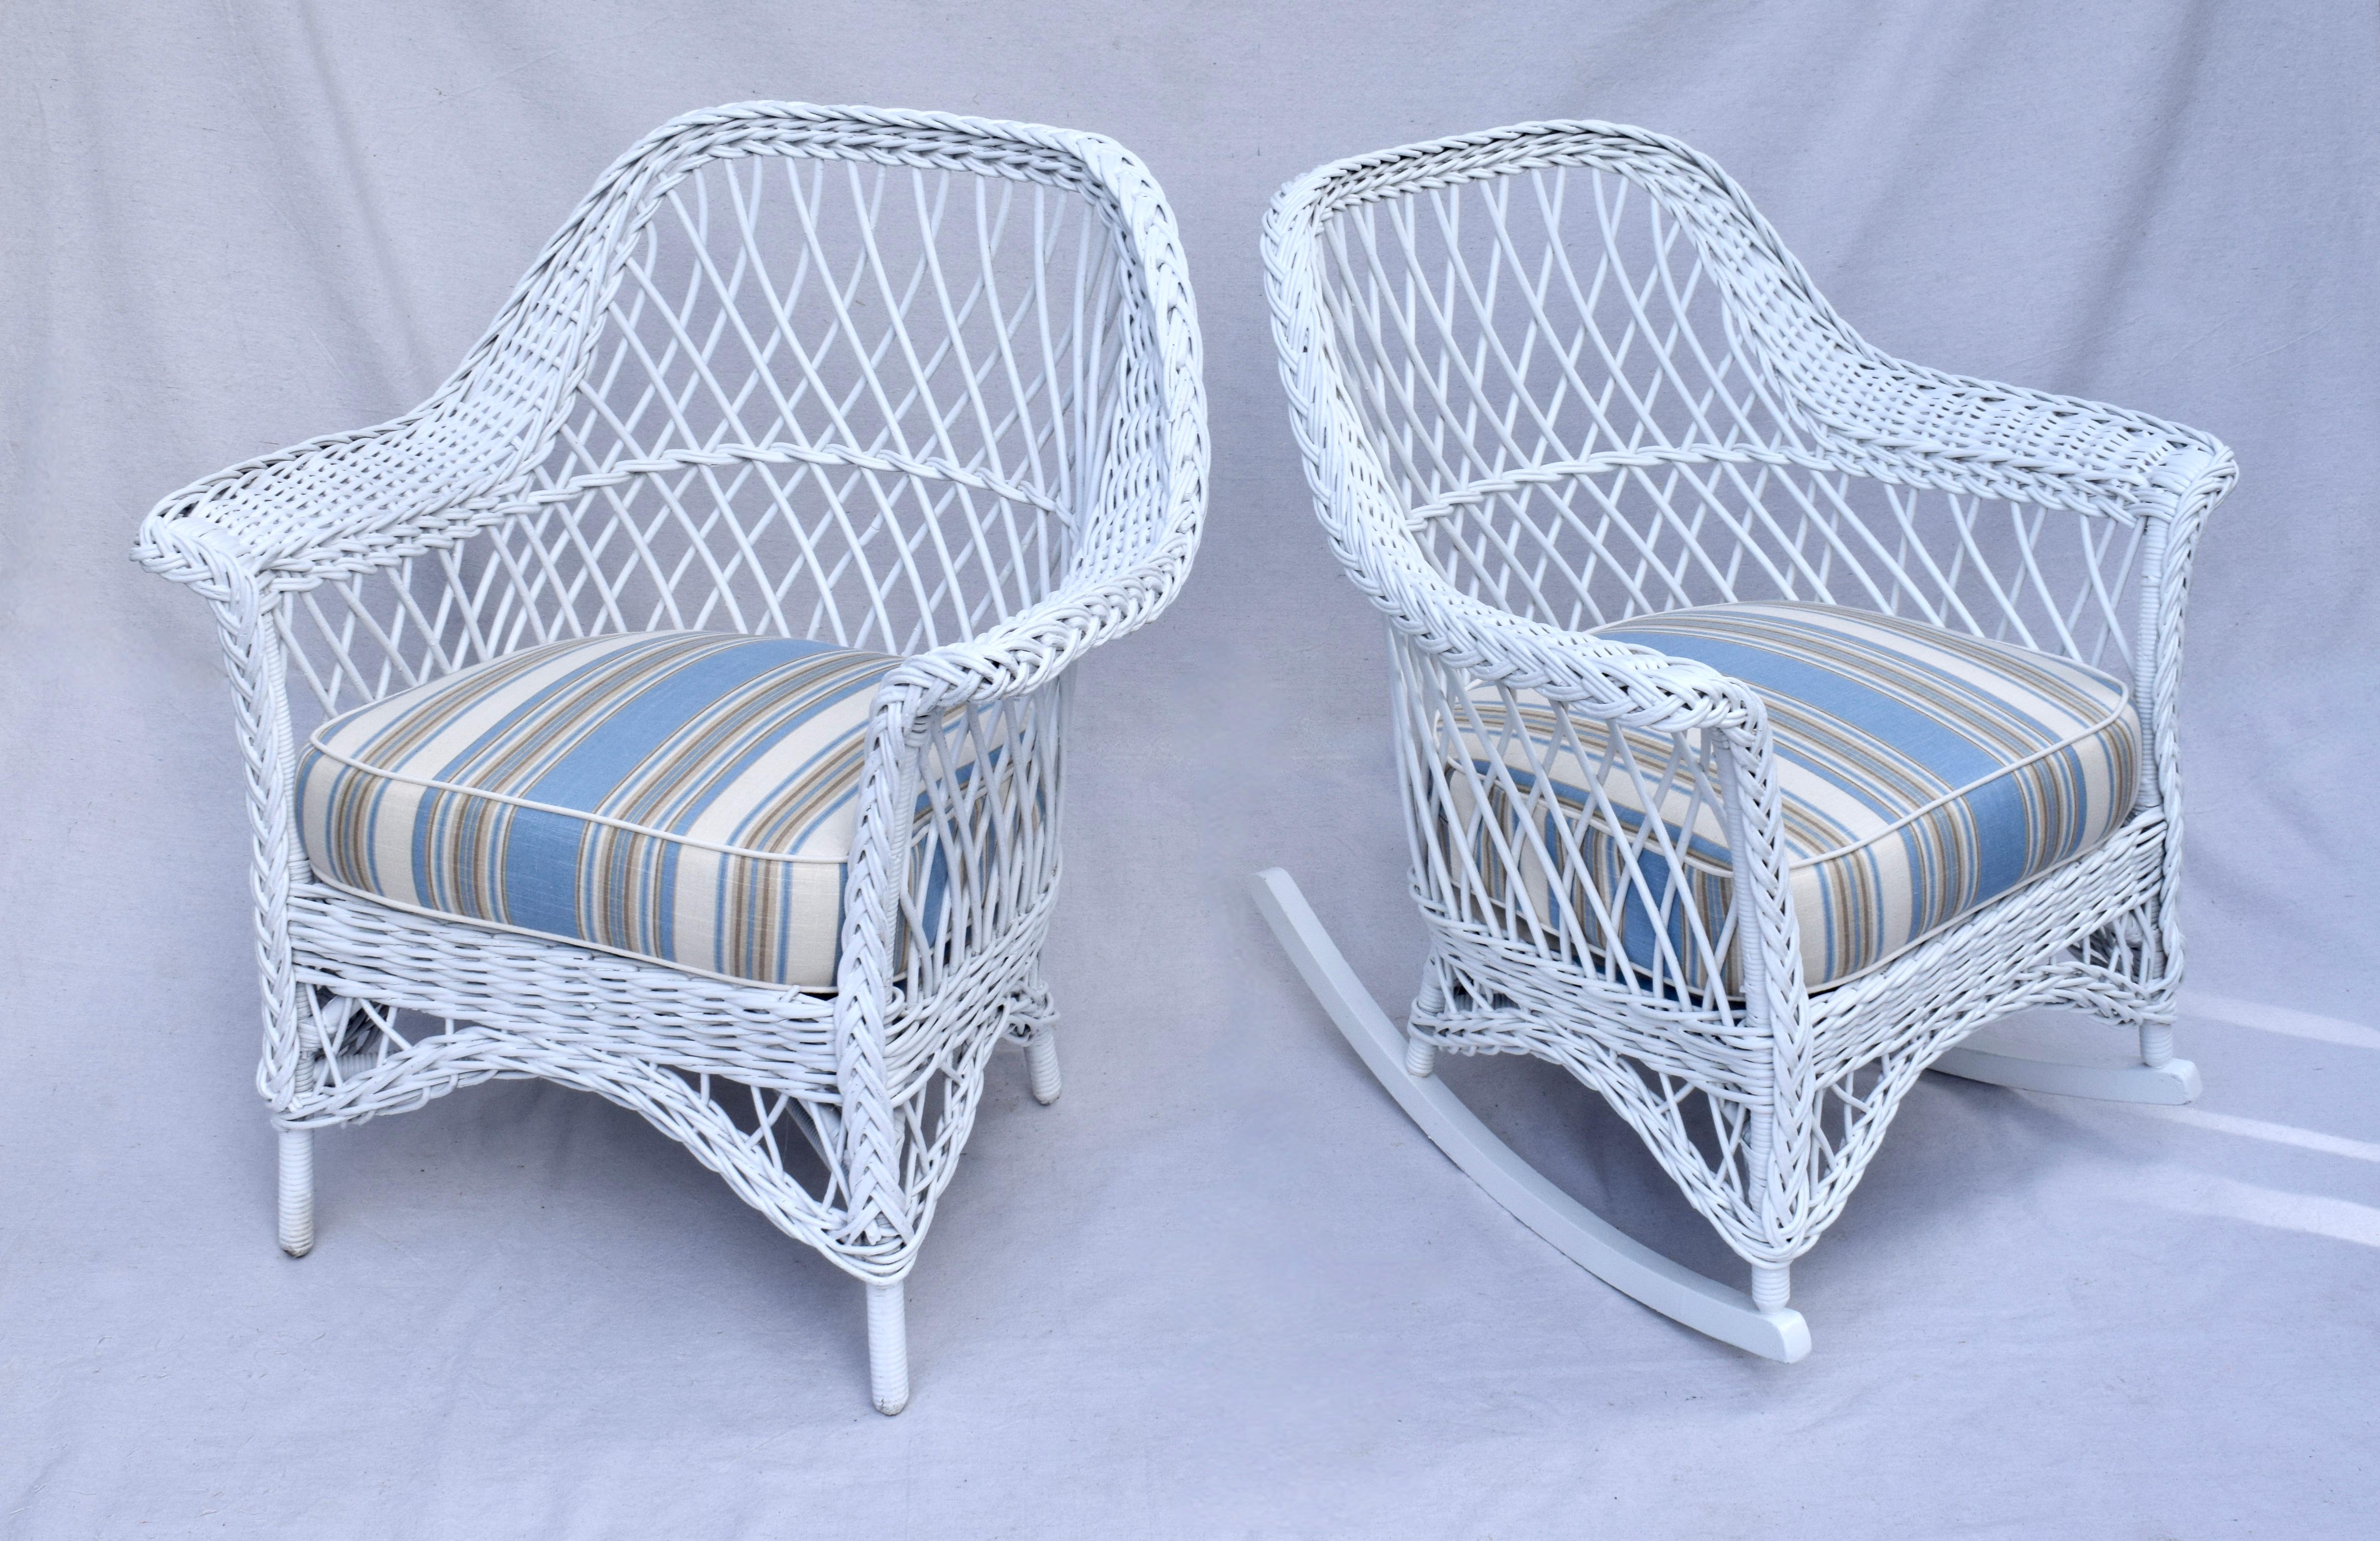 Beautifully preserved early 20th c. American willow and reed Bar Harbor porch chair & matching rocker, newly painted with new custom cushions upholstered in blue & white coastal stripe cotton linen. Seats: 18